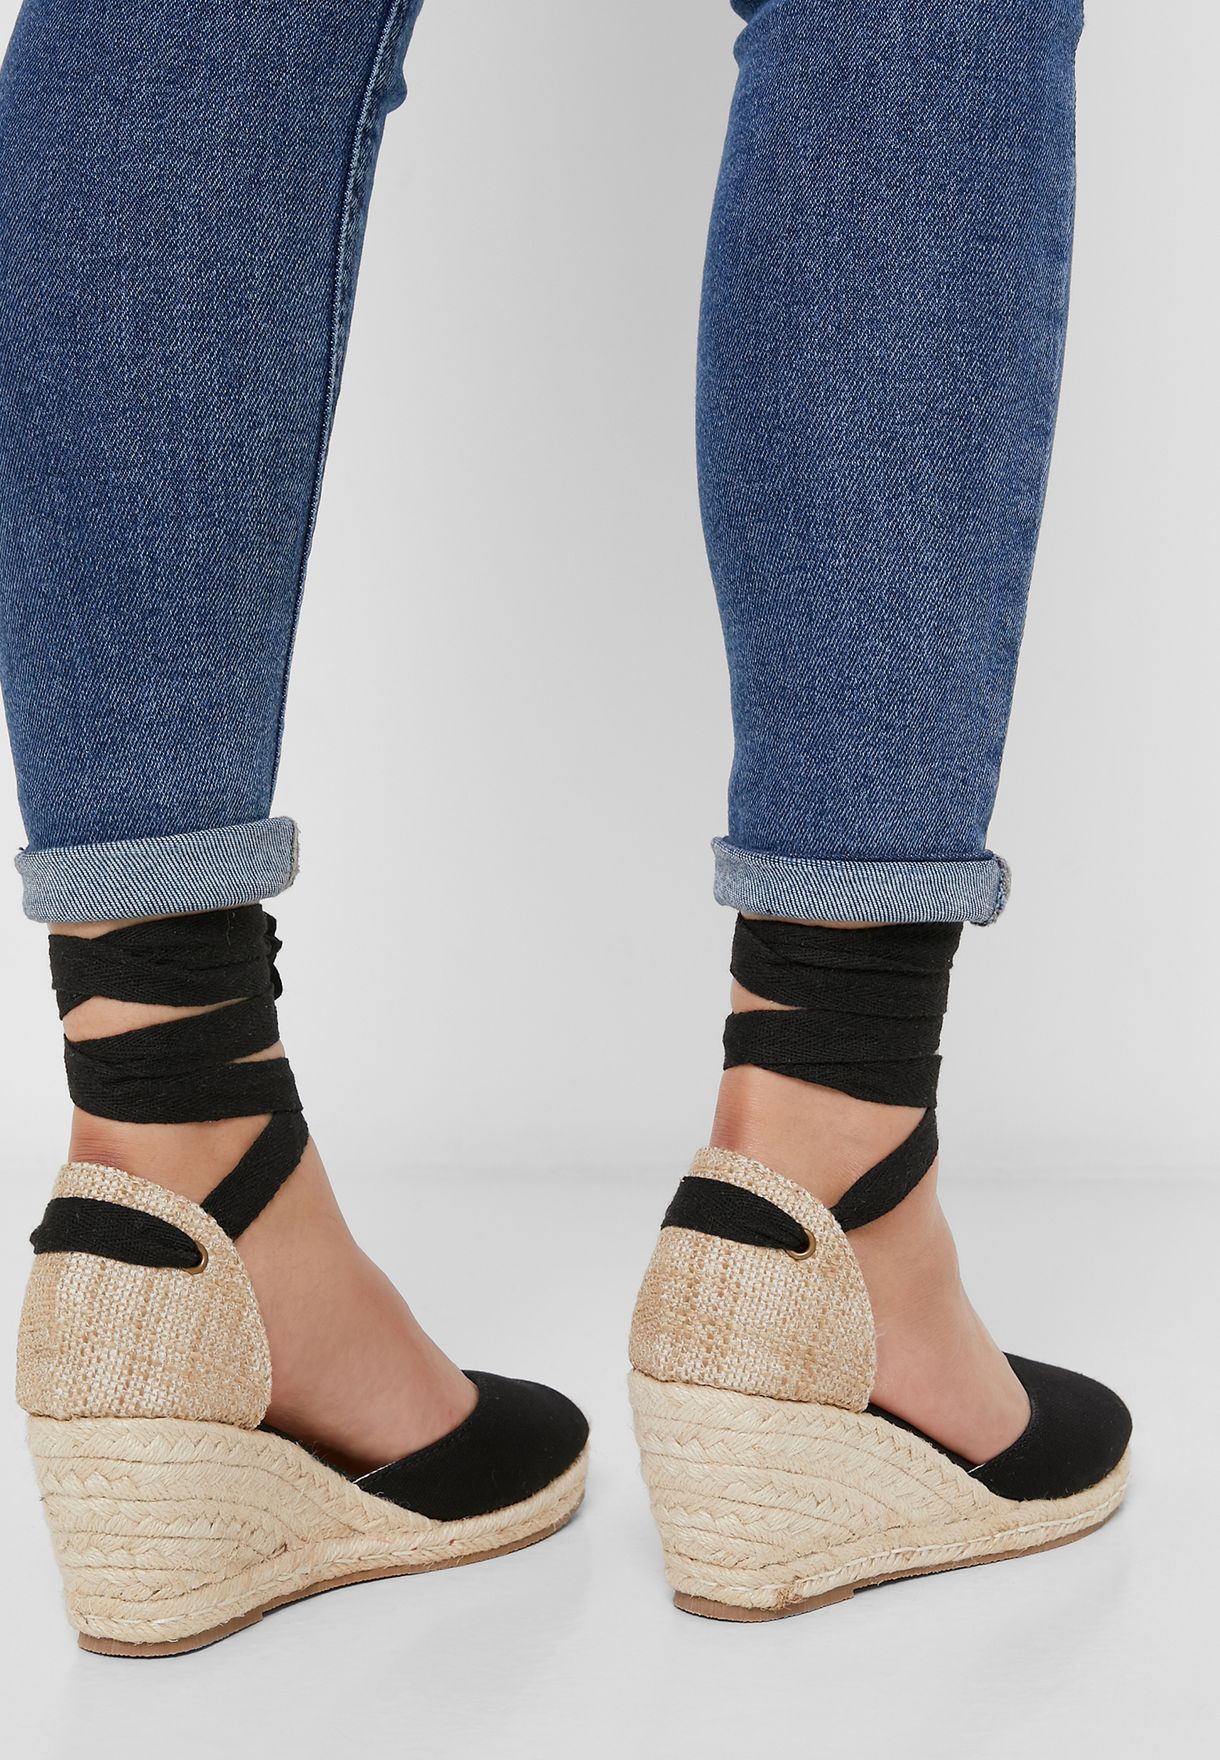 Closed Toe Lace Up Wedge Sandal